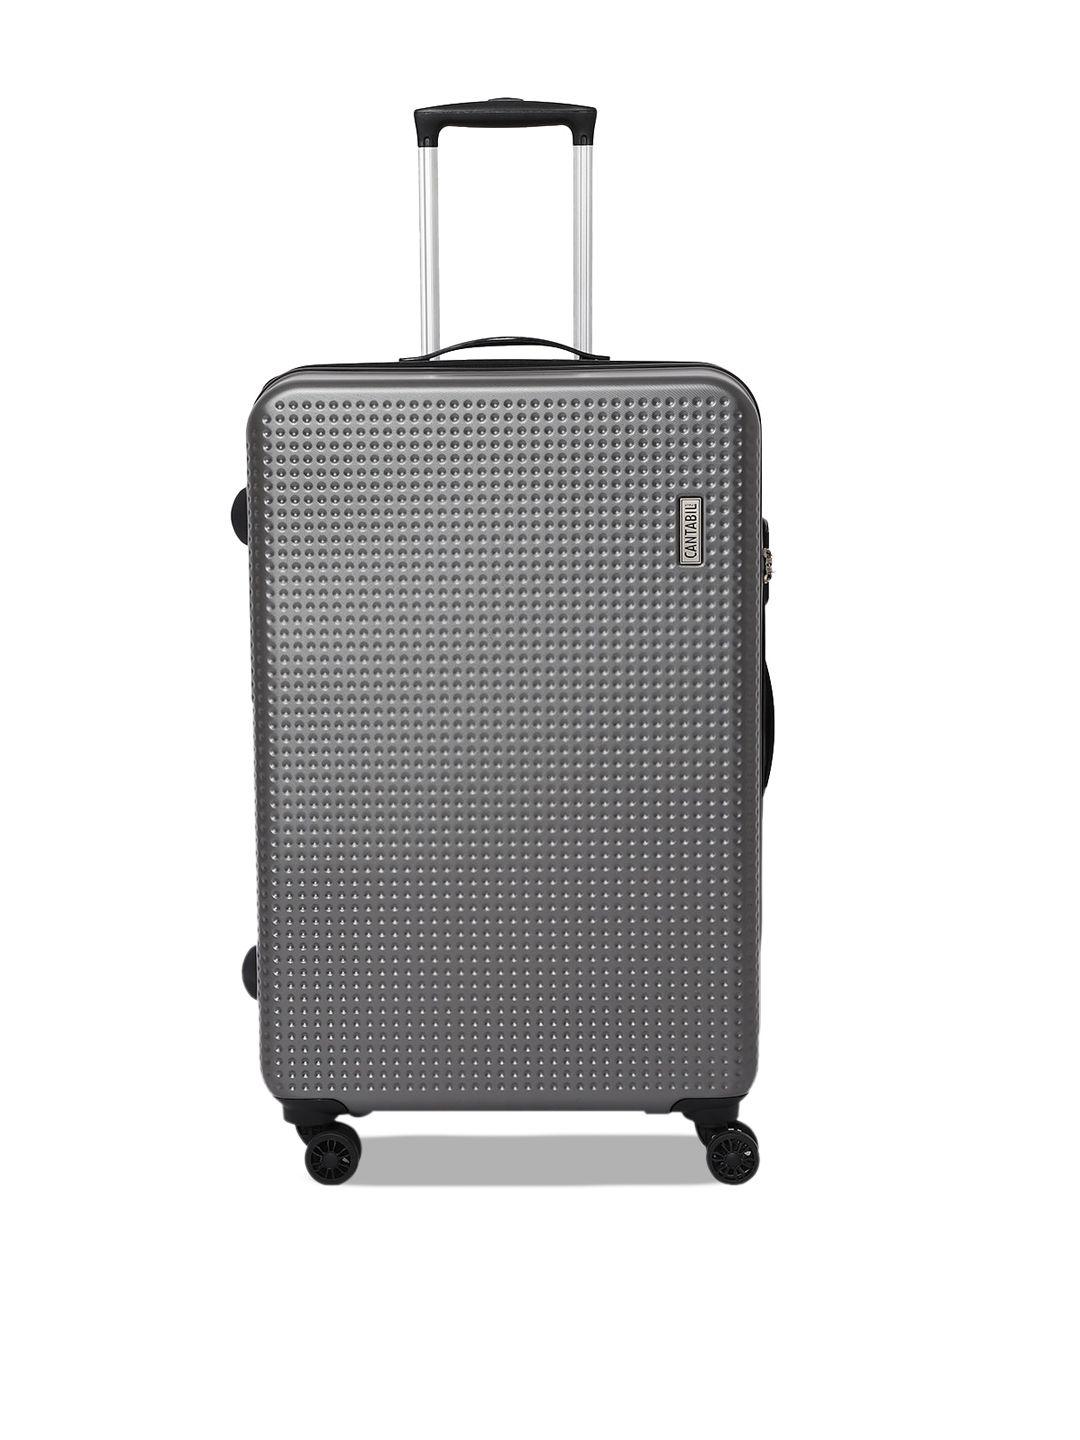 cantabil textured hard sided large trolley suitcase